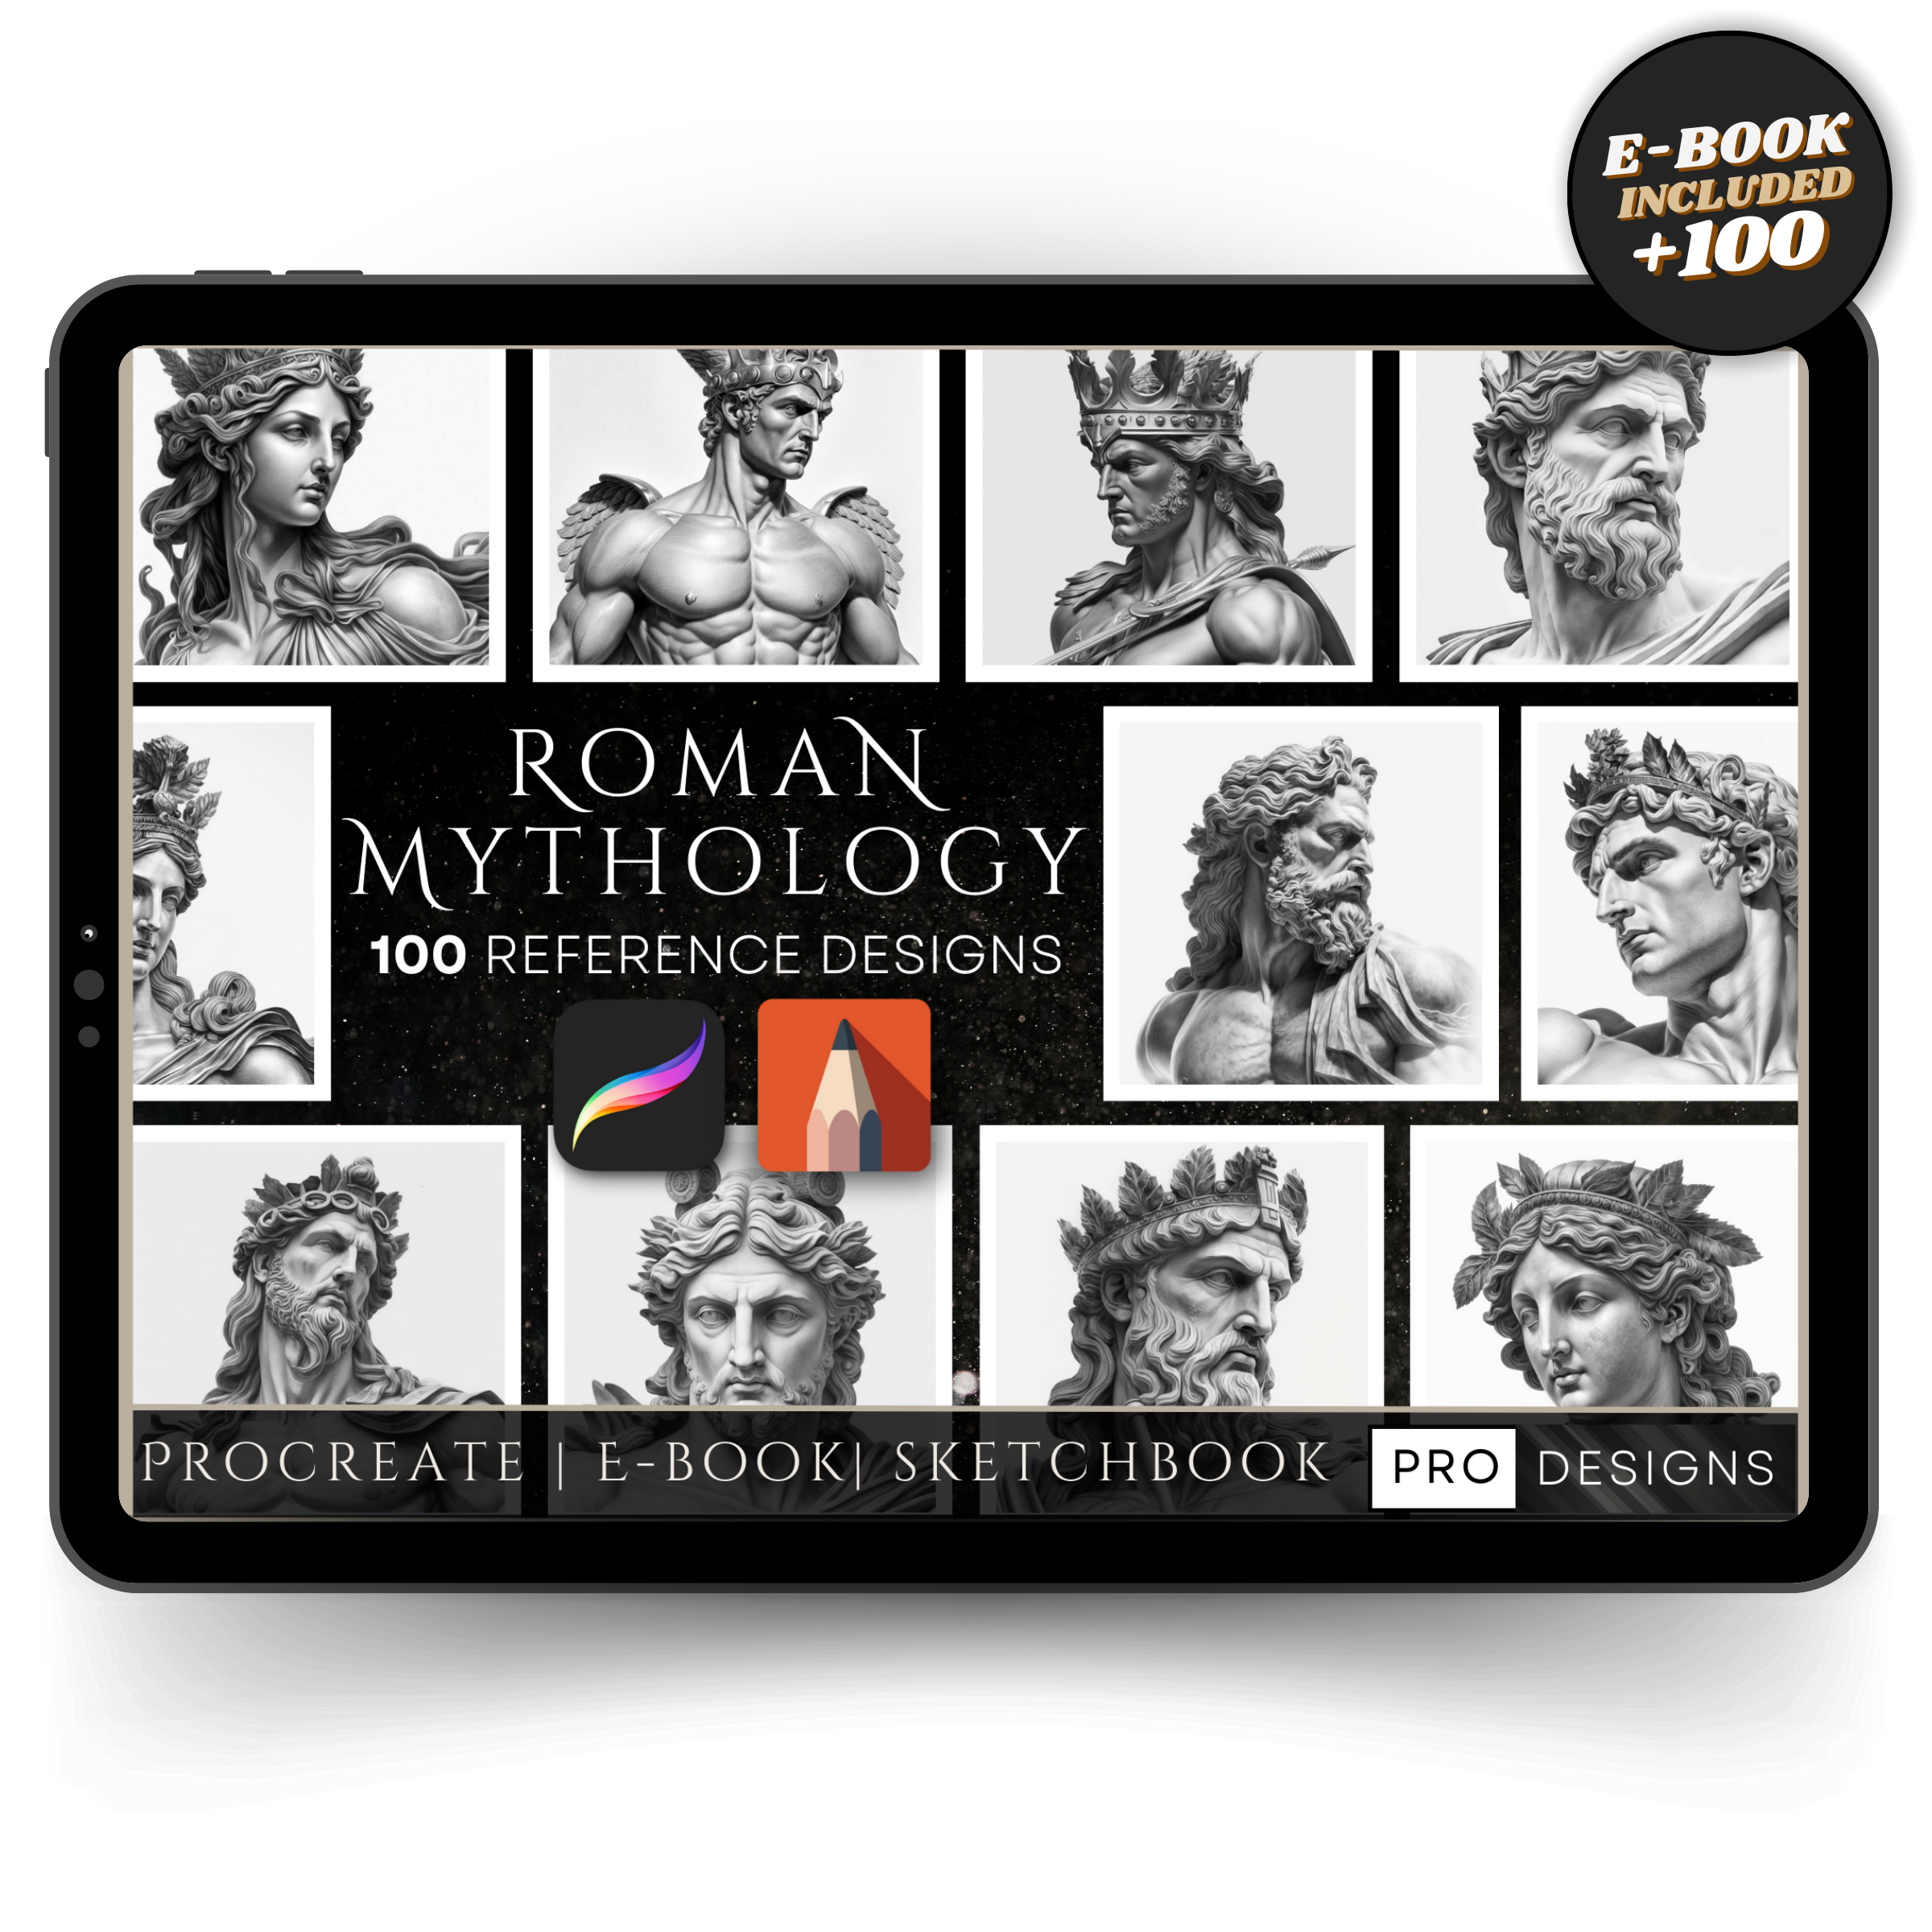 "Legends of Rome" - The Roman Mythology Collection